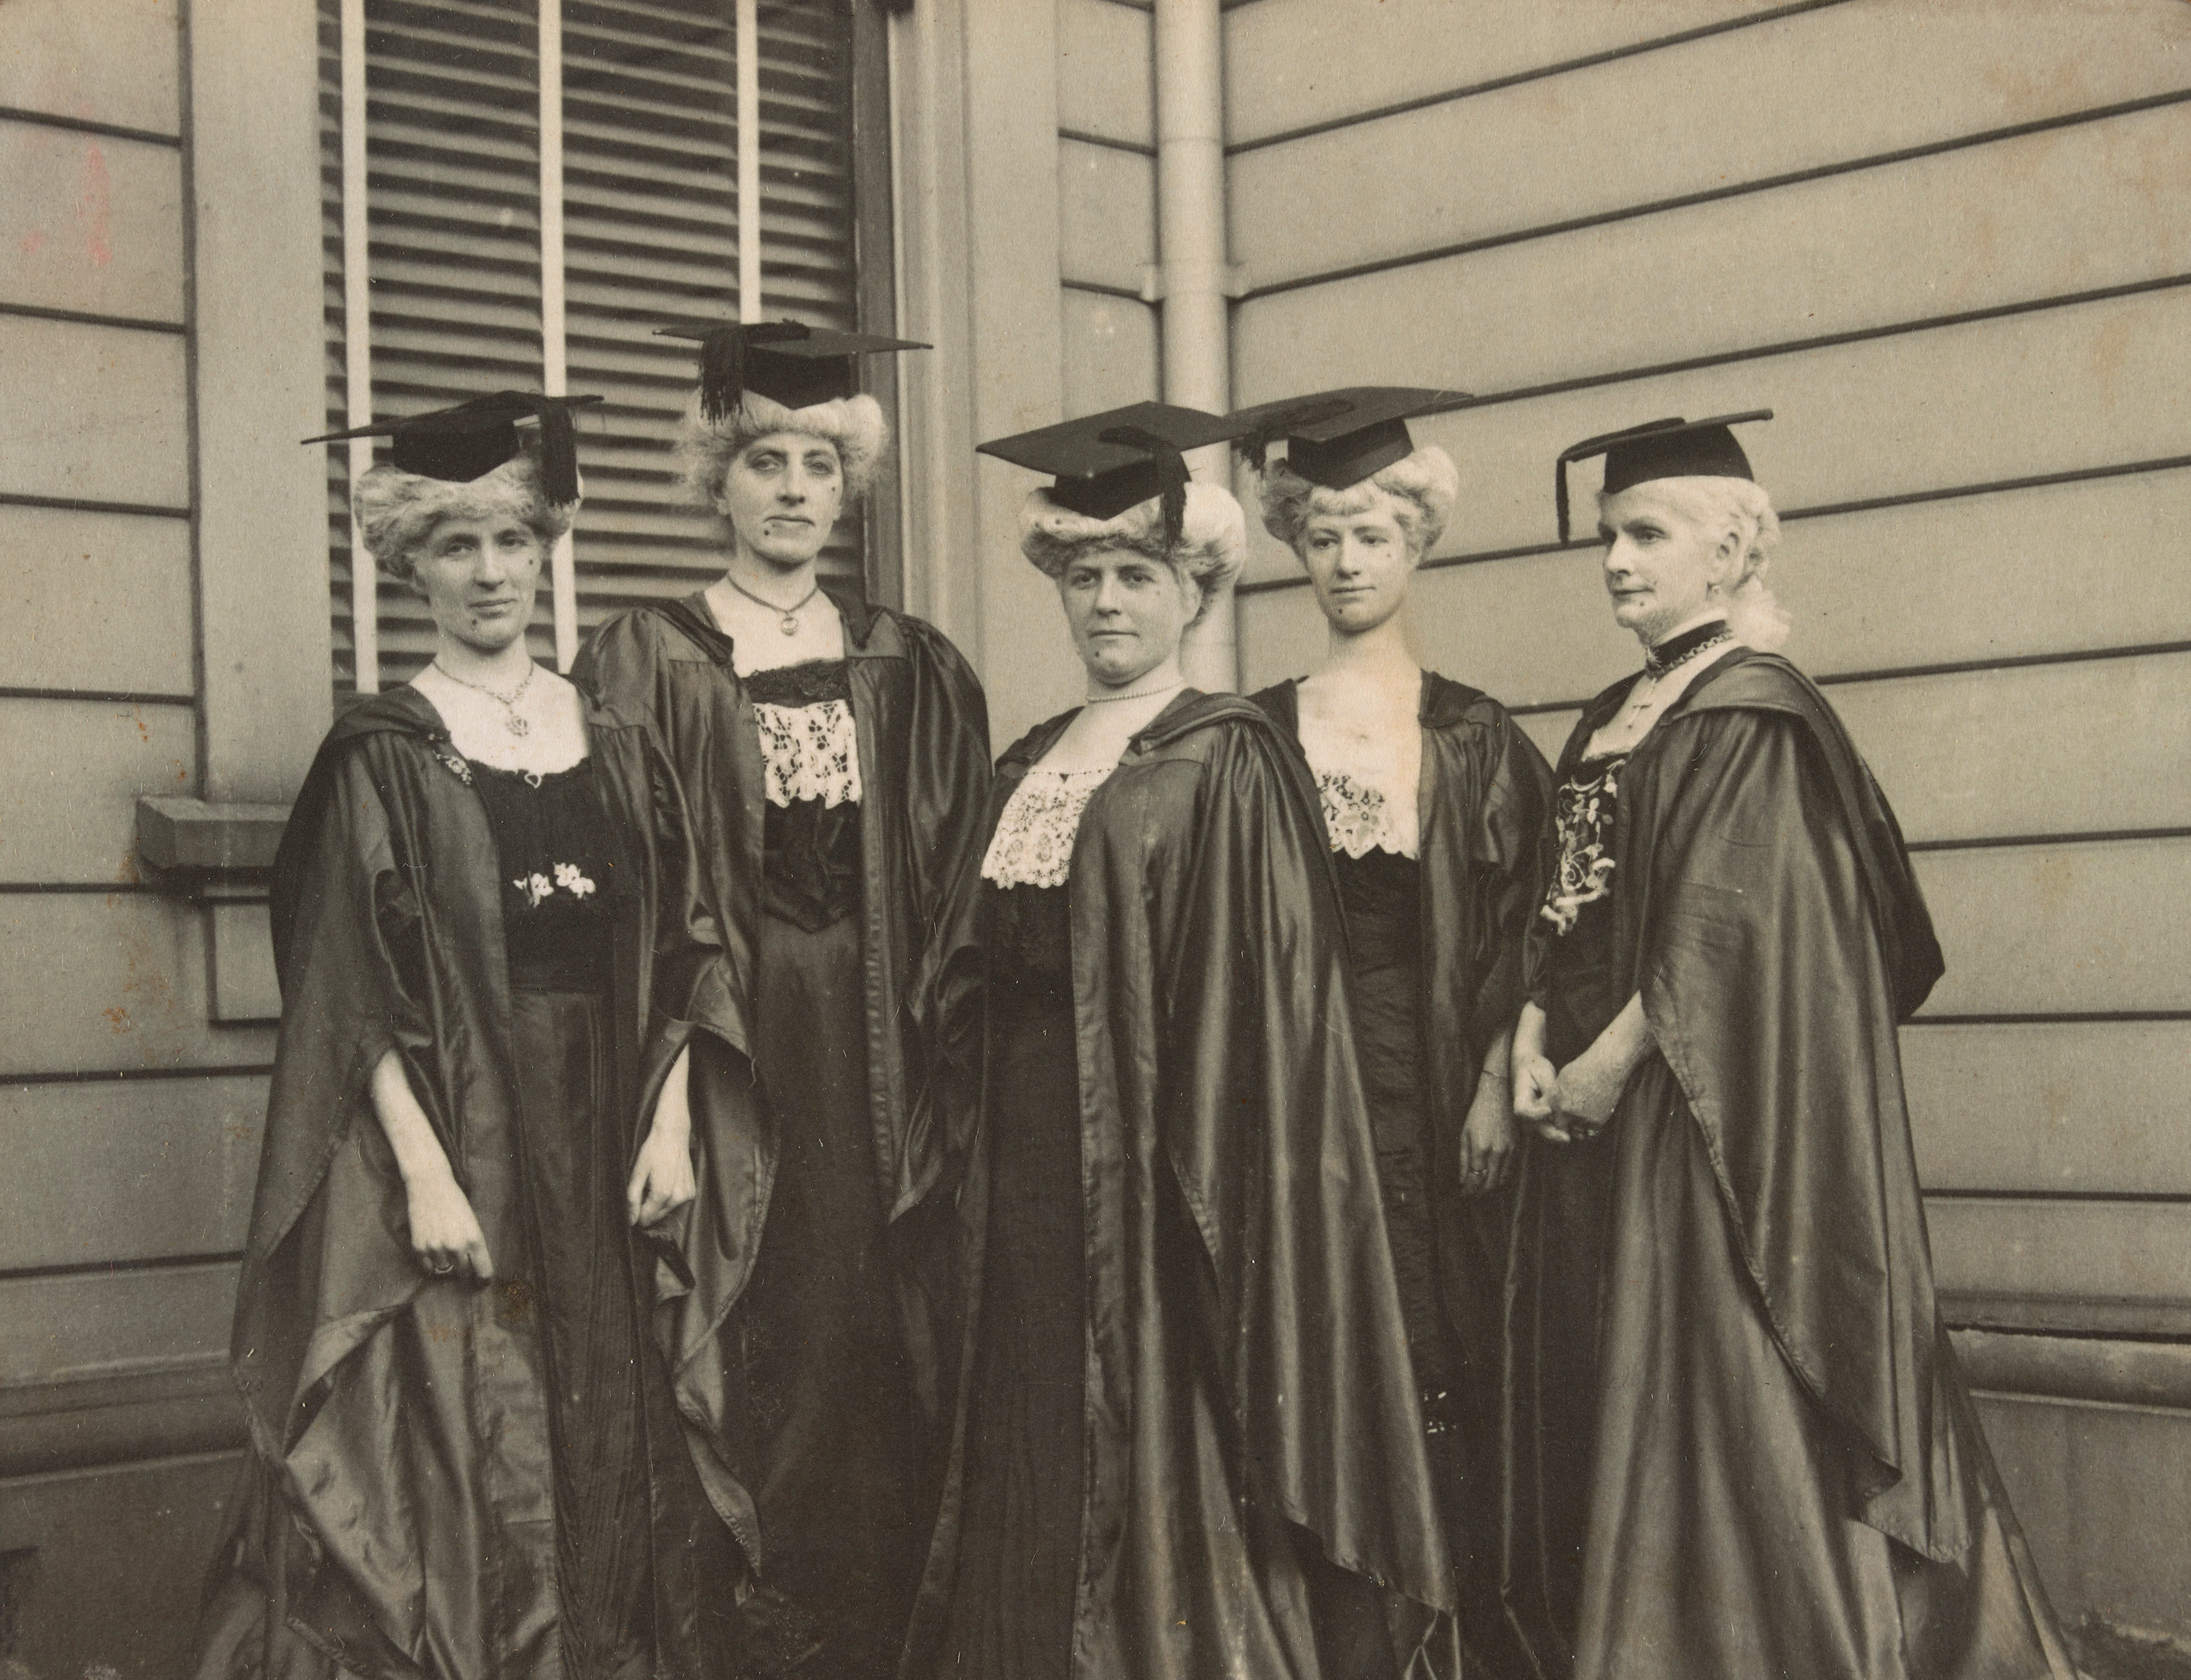 Five women in academic gowns, wigs and beauty spots